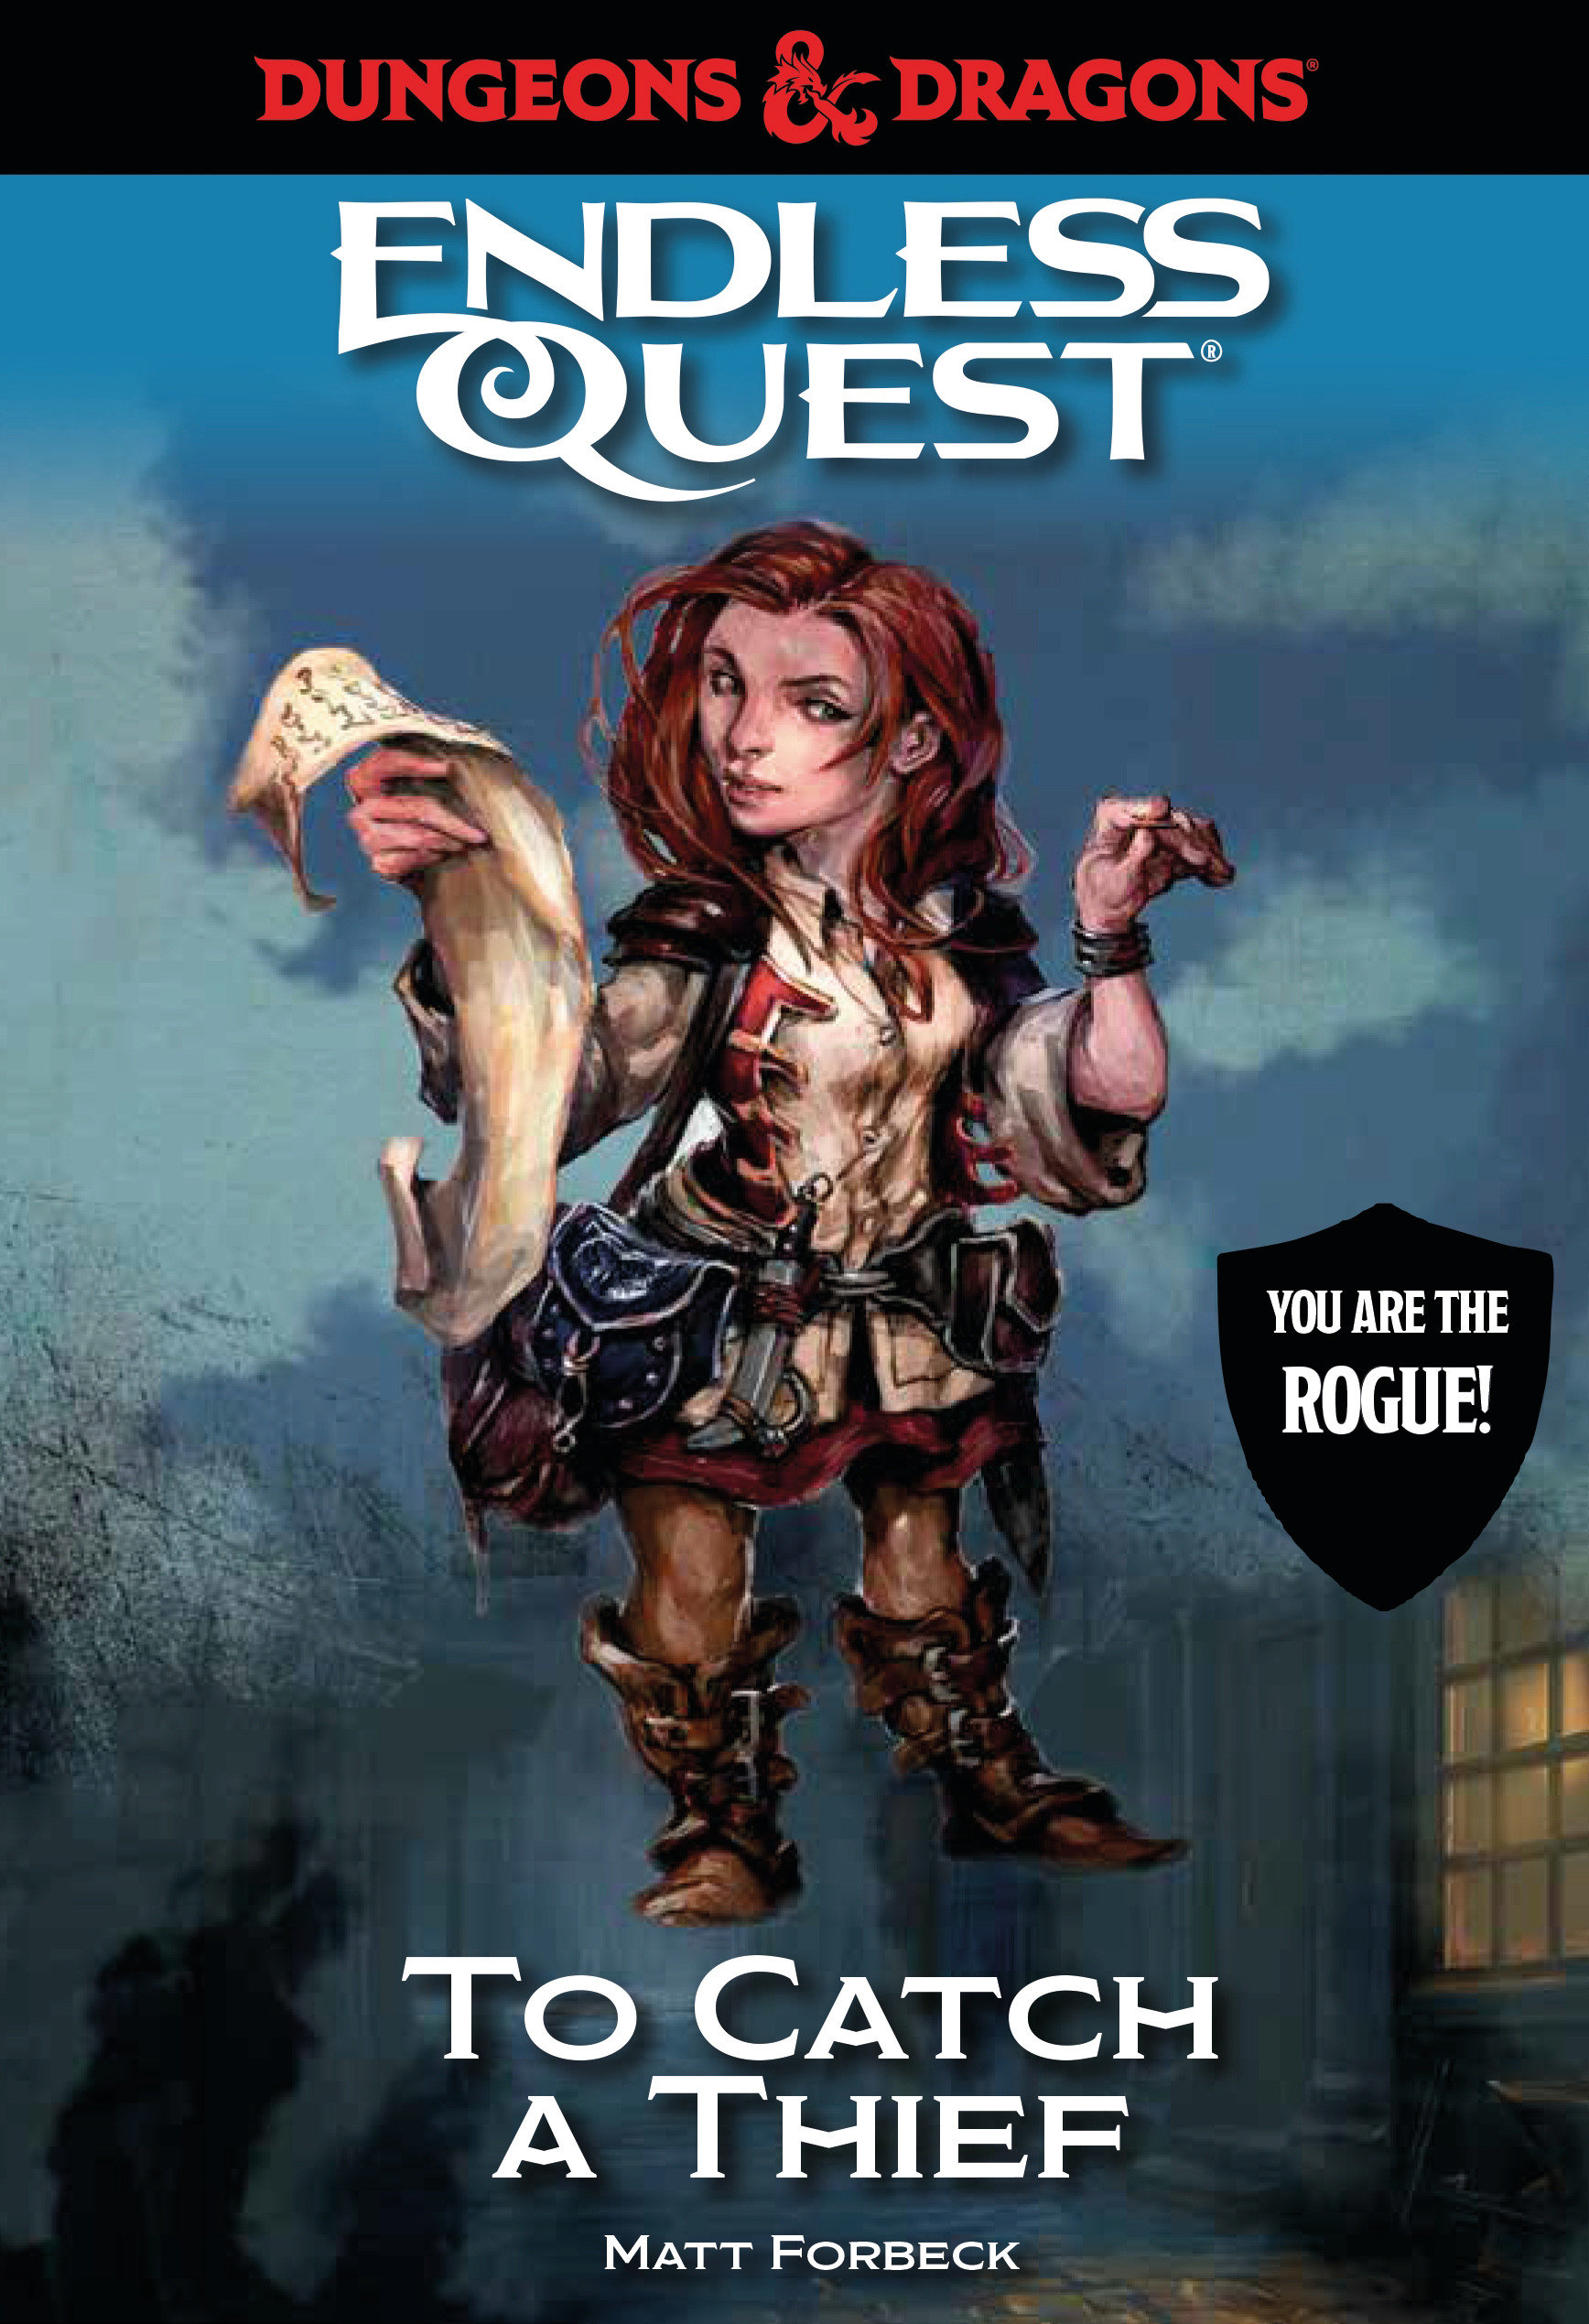 Dungeons & Dragons Endless Quest To Catch A Thief